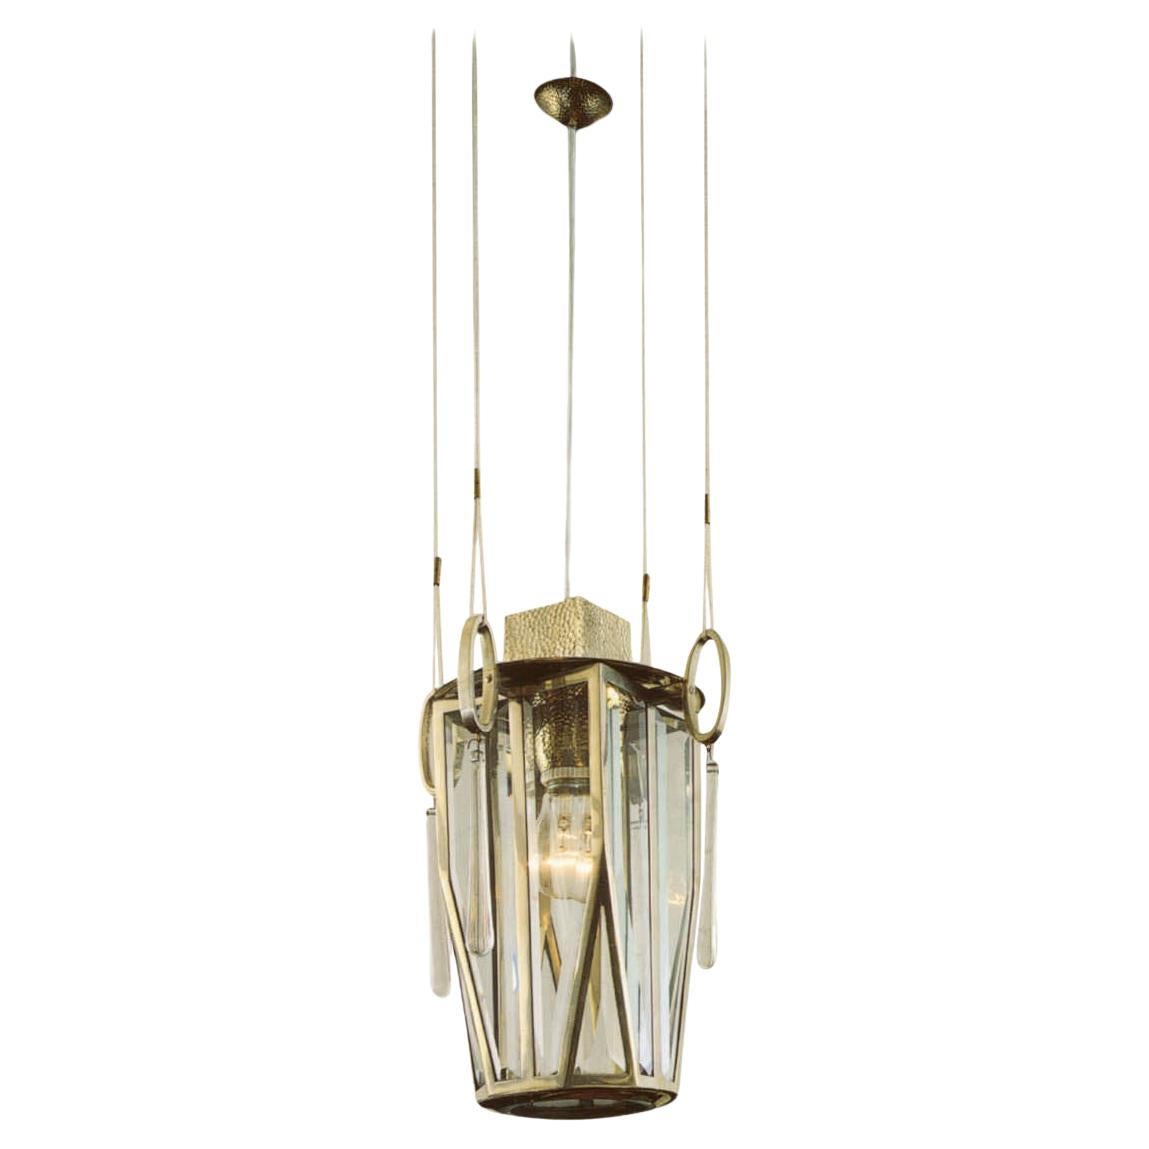  Lantern for the Baroness Magda Mautner Markhof, brass hammered silver plated For Sale